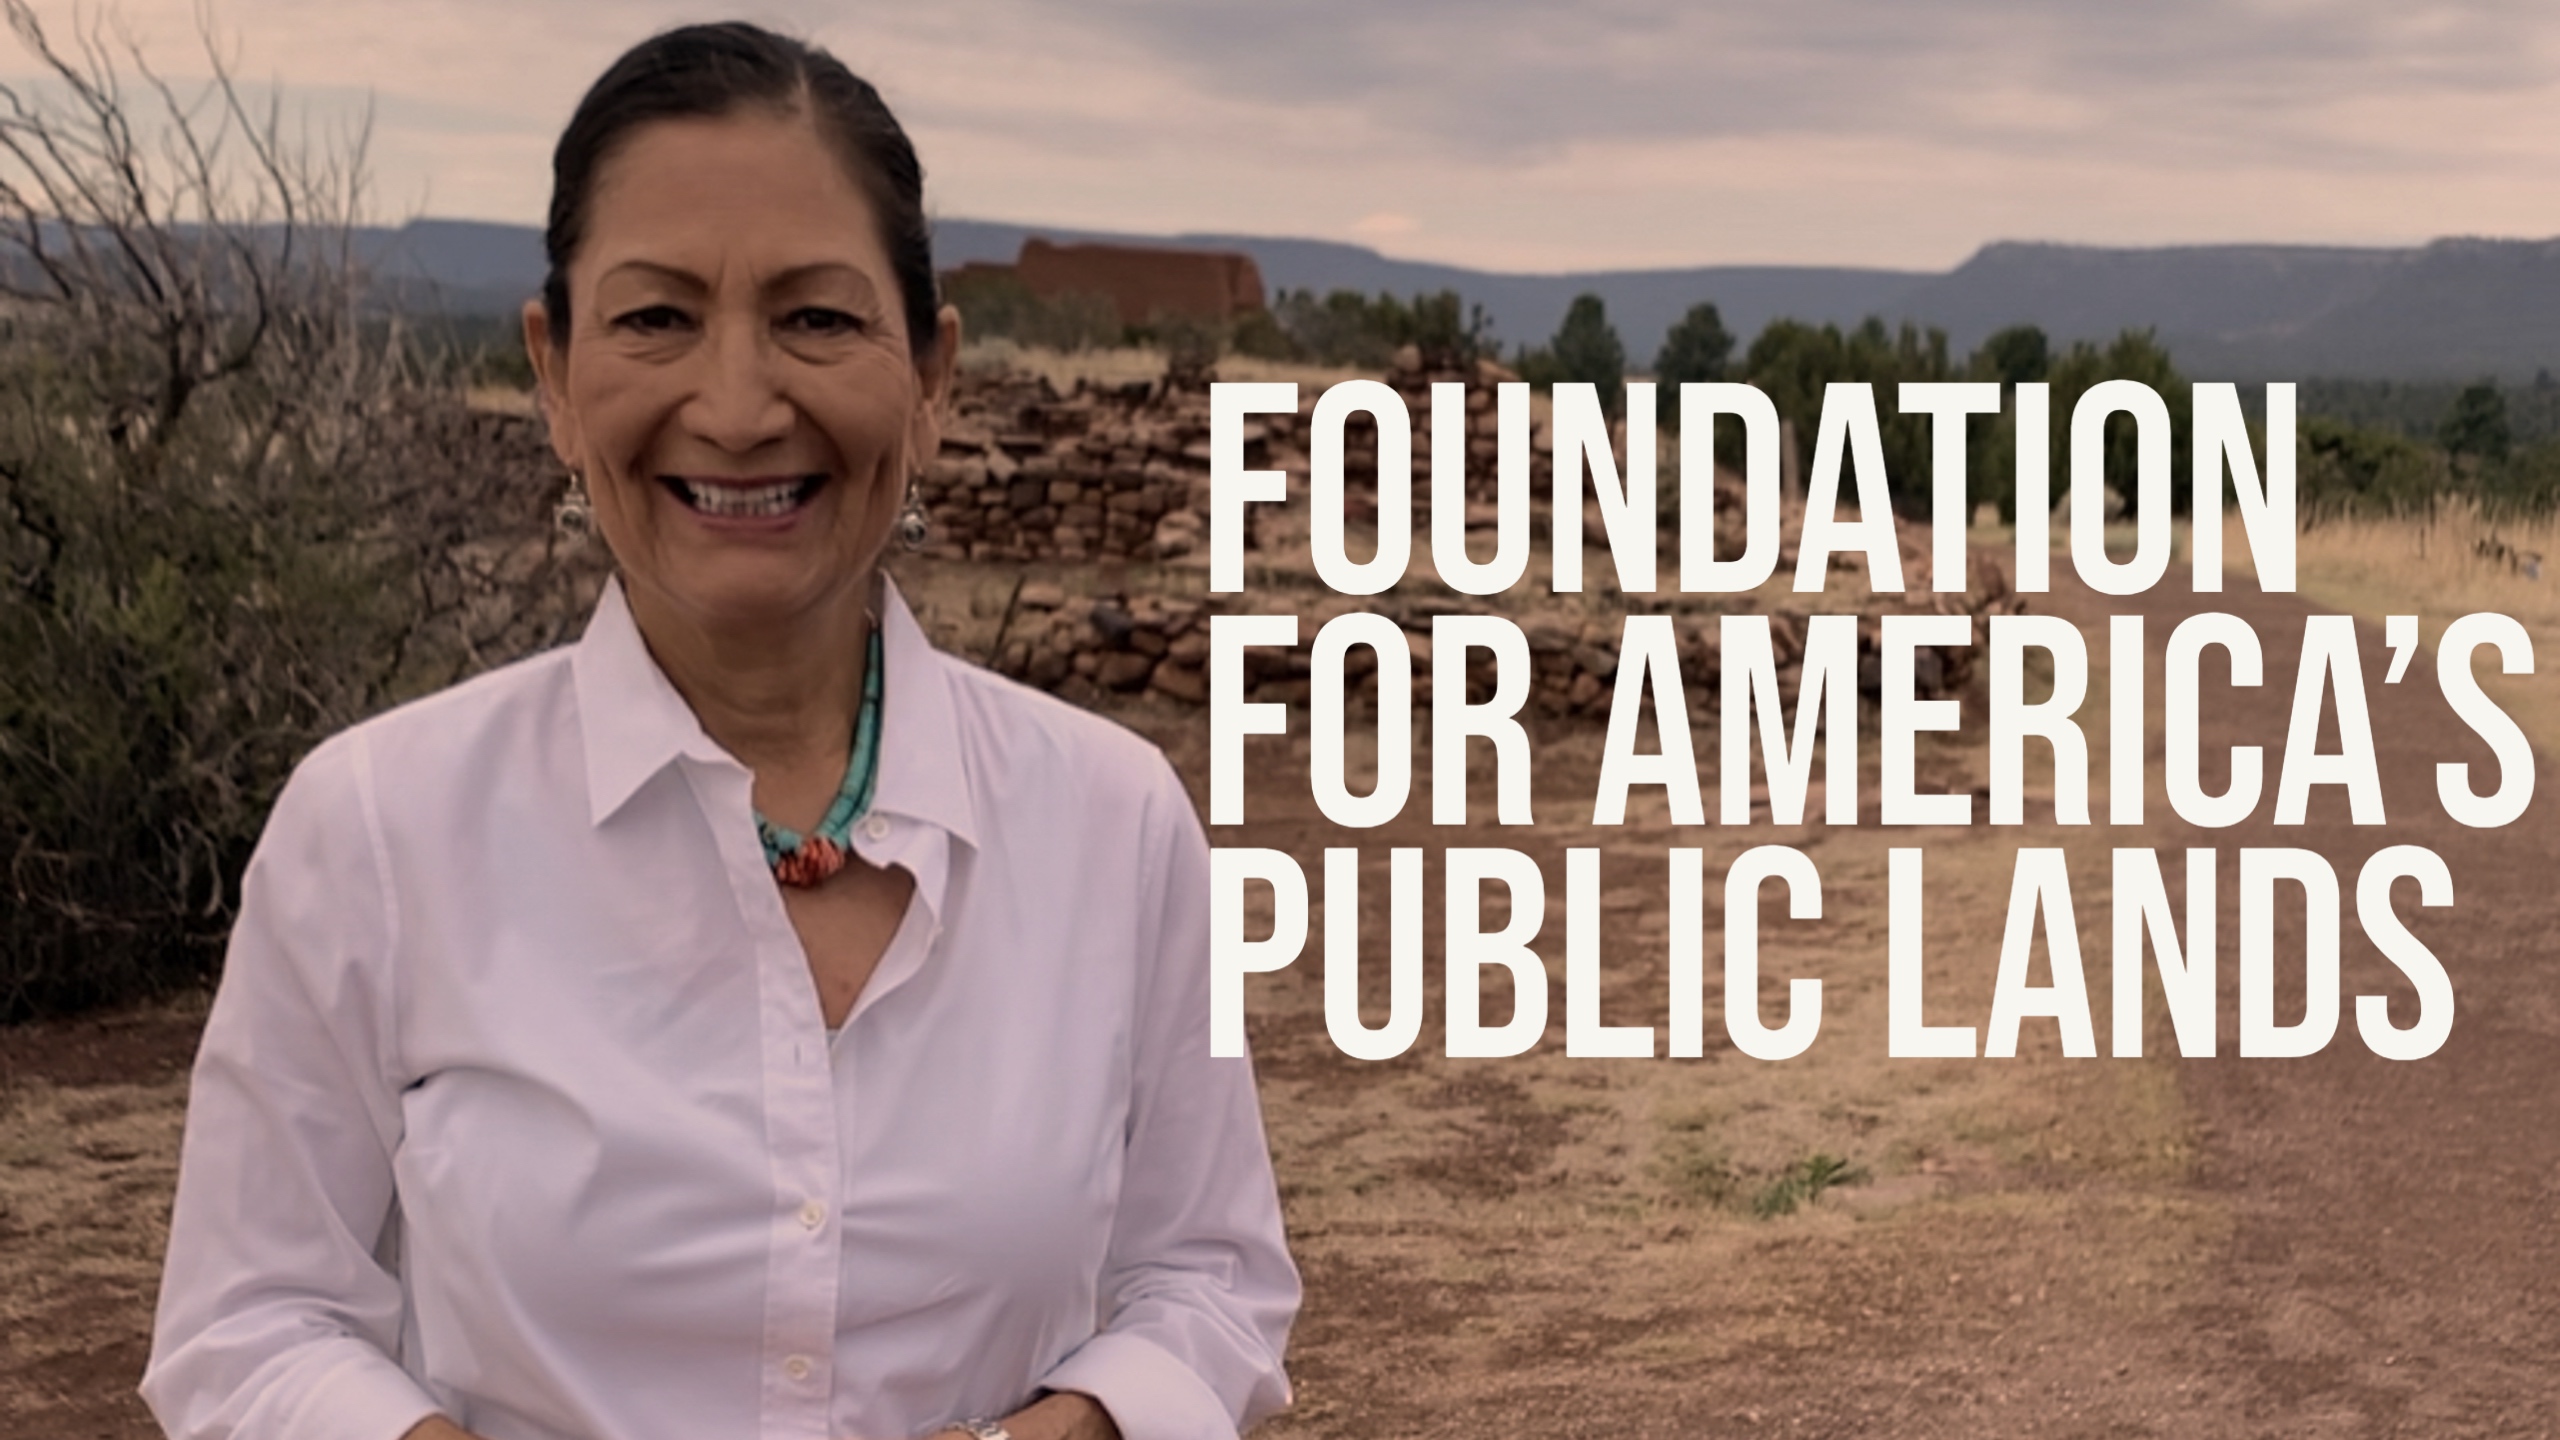 Foundation for America’s Public Lands